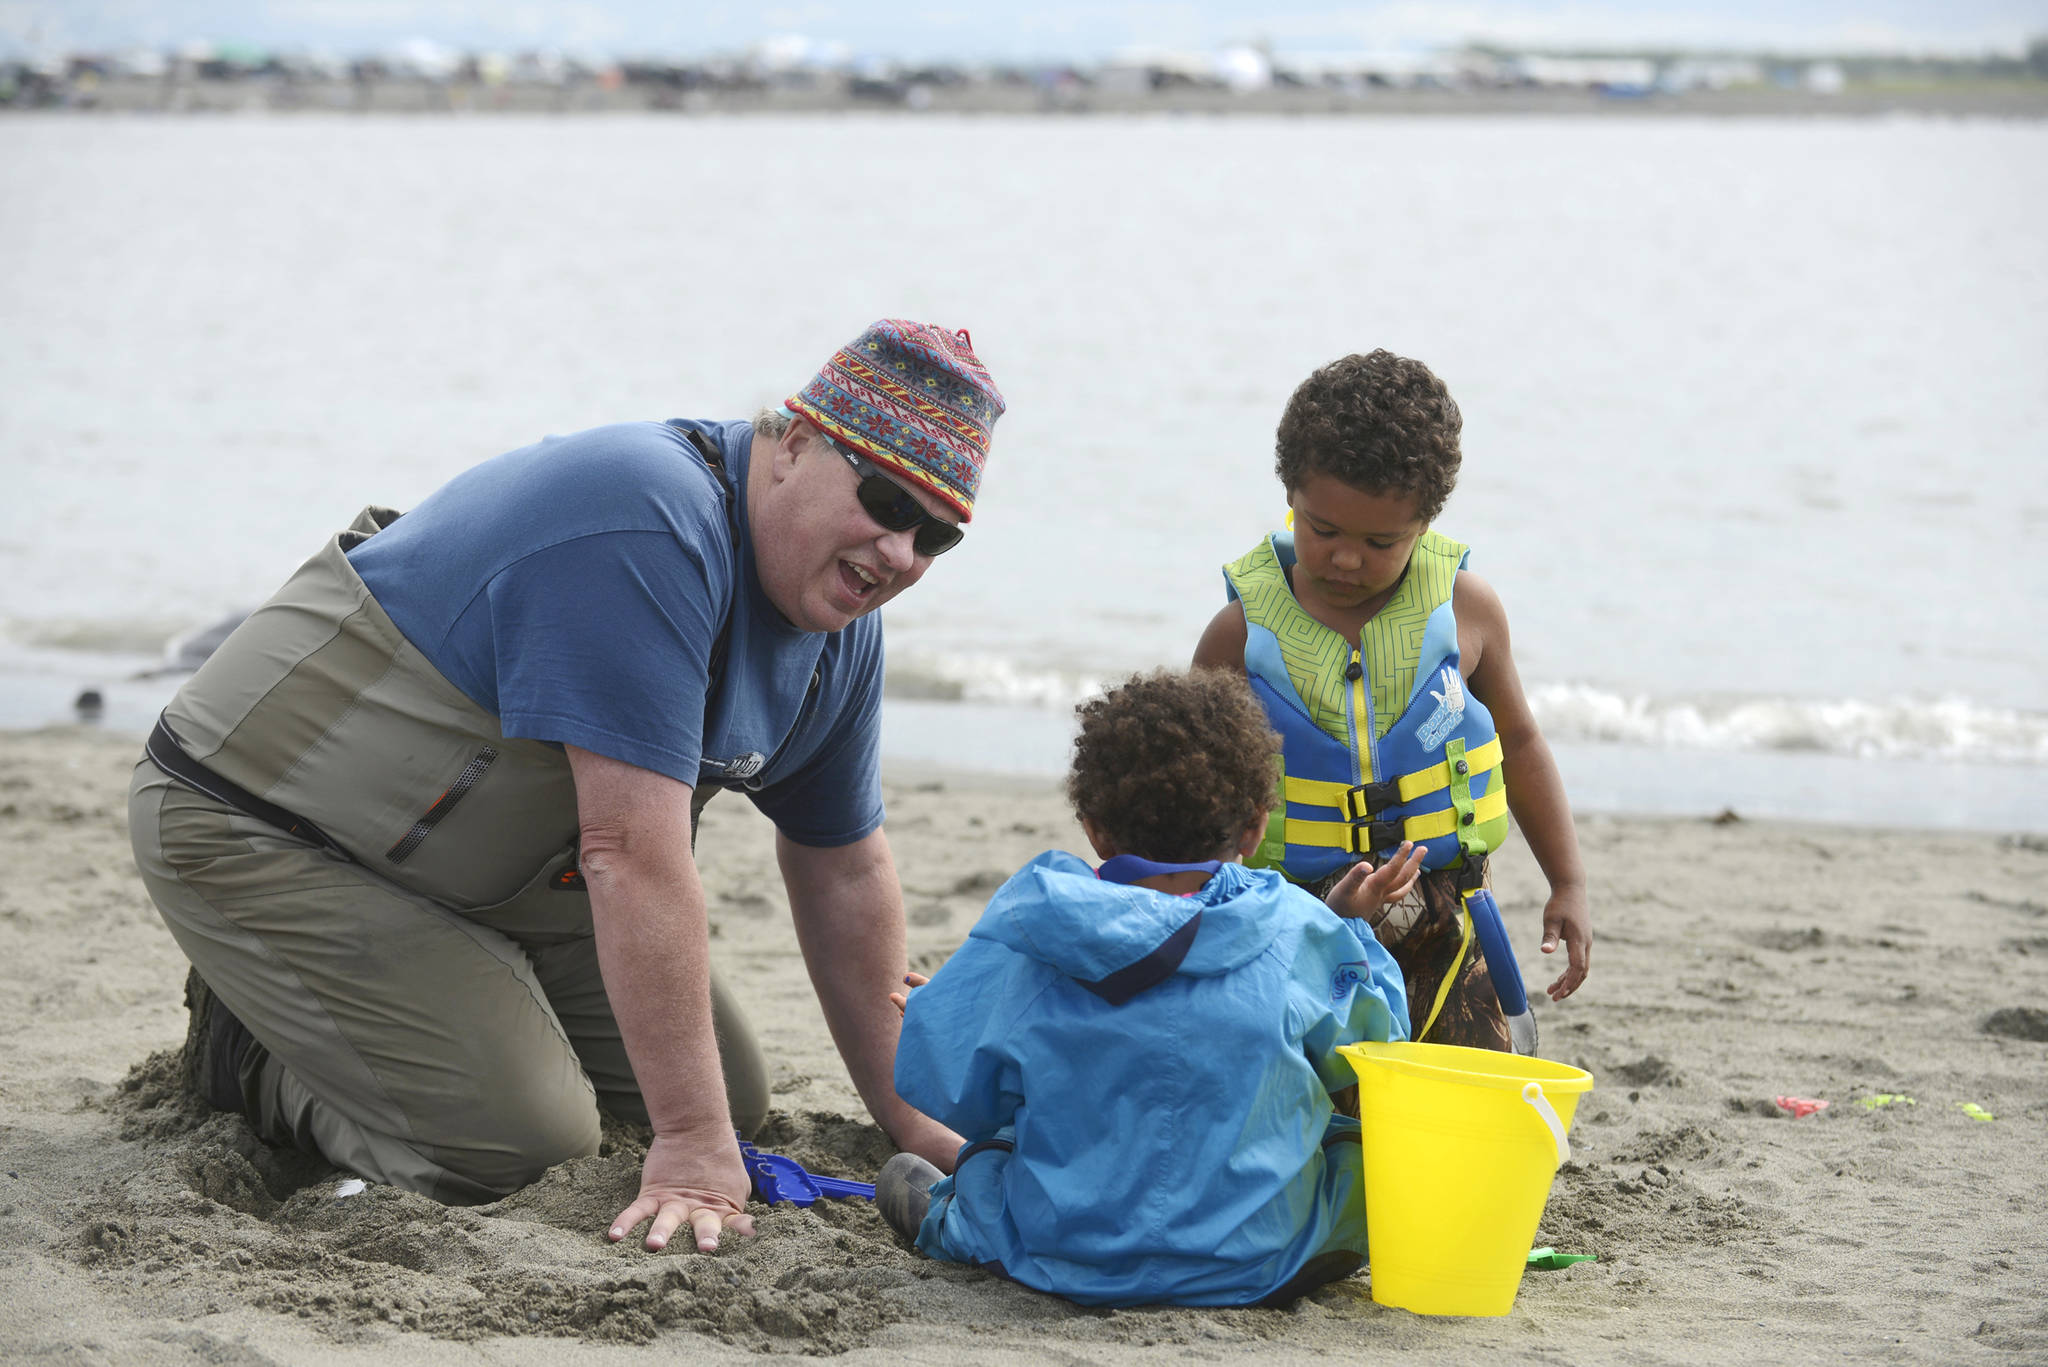 Dipnetter Brad Gamblin (left) digs in the sand of Kenai’s north beach with his grandchildren Stella (in blue) and Marly Wilson on Thursday, July 26, 2018 in Kenai, Alaska. The three, plus grandmother Cher Gamblin, brought the grandchildren on their first dipnetting trip this year. The morning, Brad Gamblin said, “was very productive.” Getting up early, he said the family had caught a dozen salmon by 9 a.m. (Ben Boettger/Peninsula Clarion)